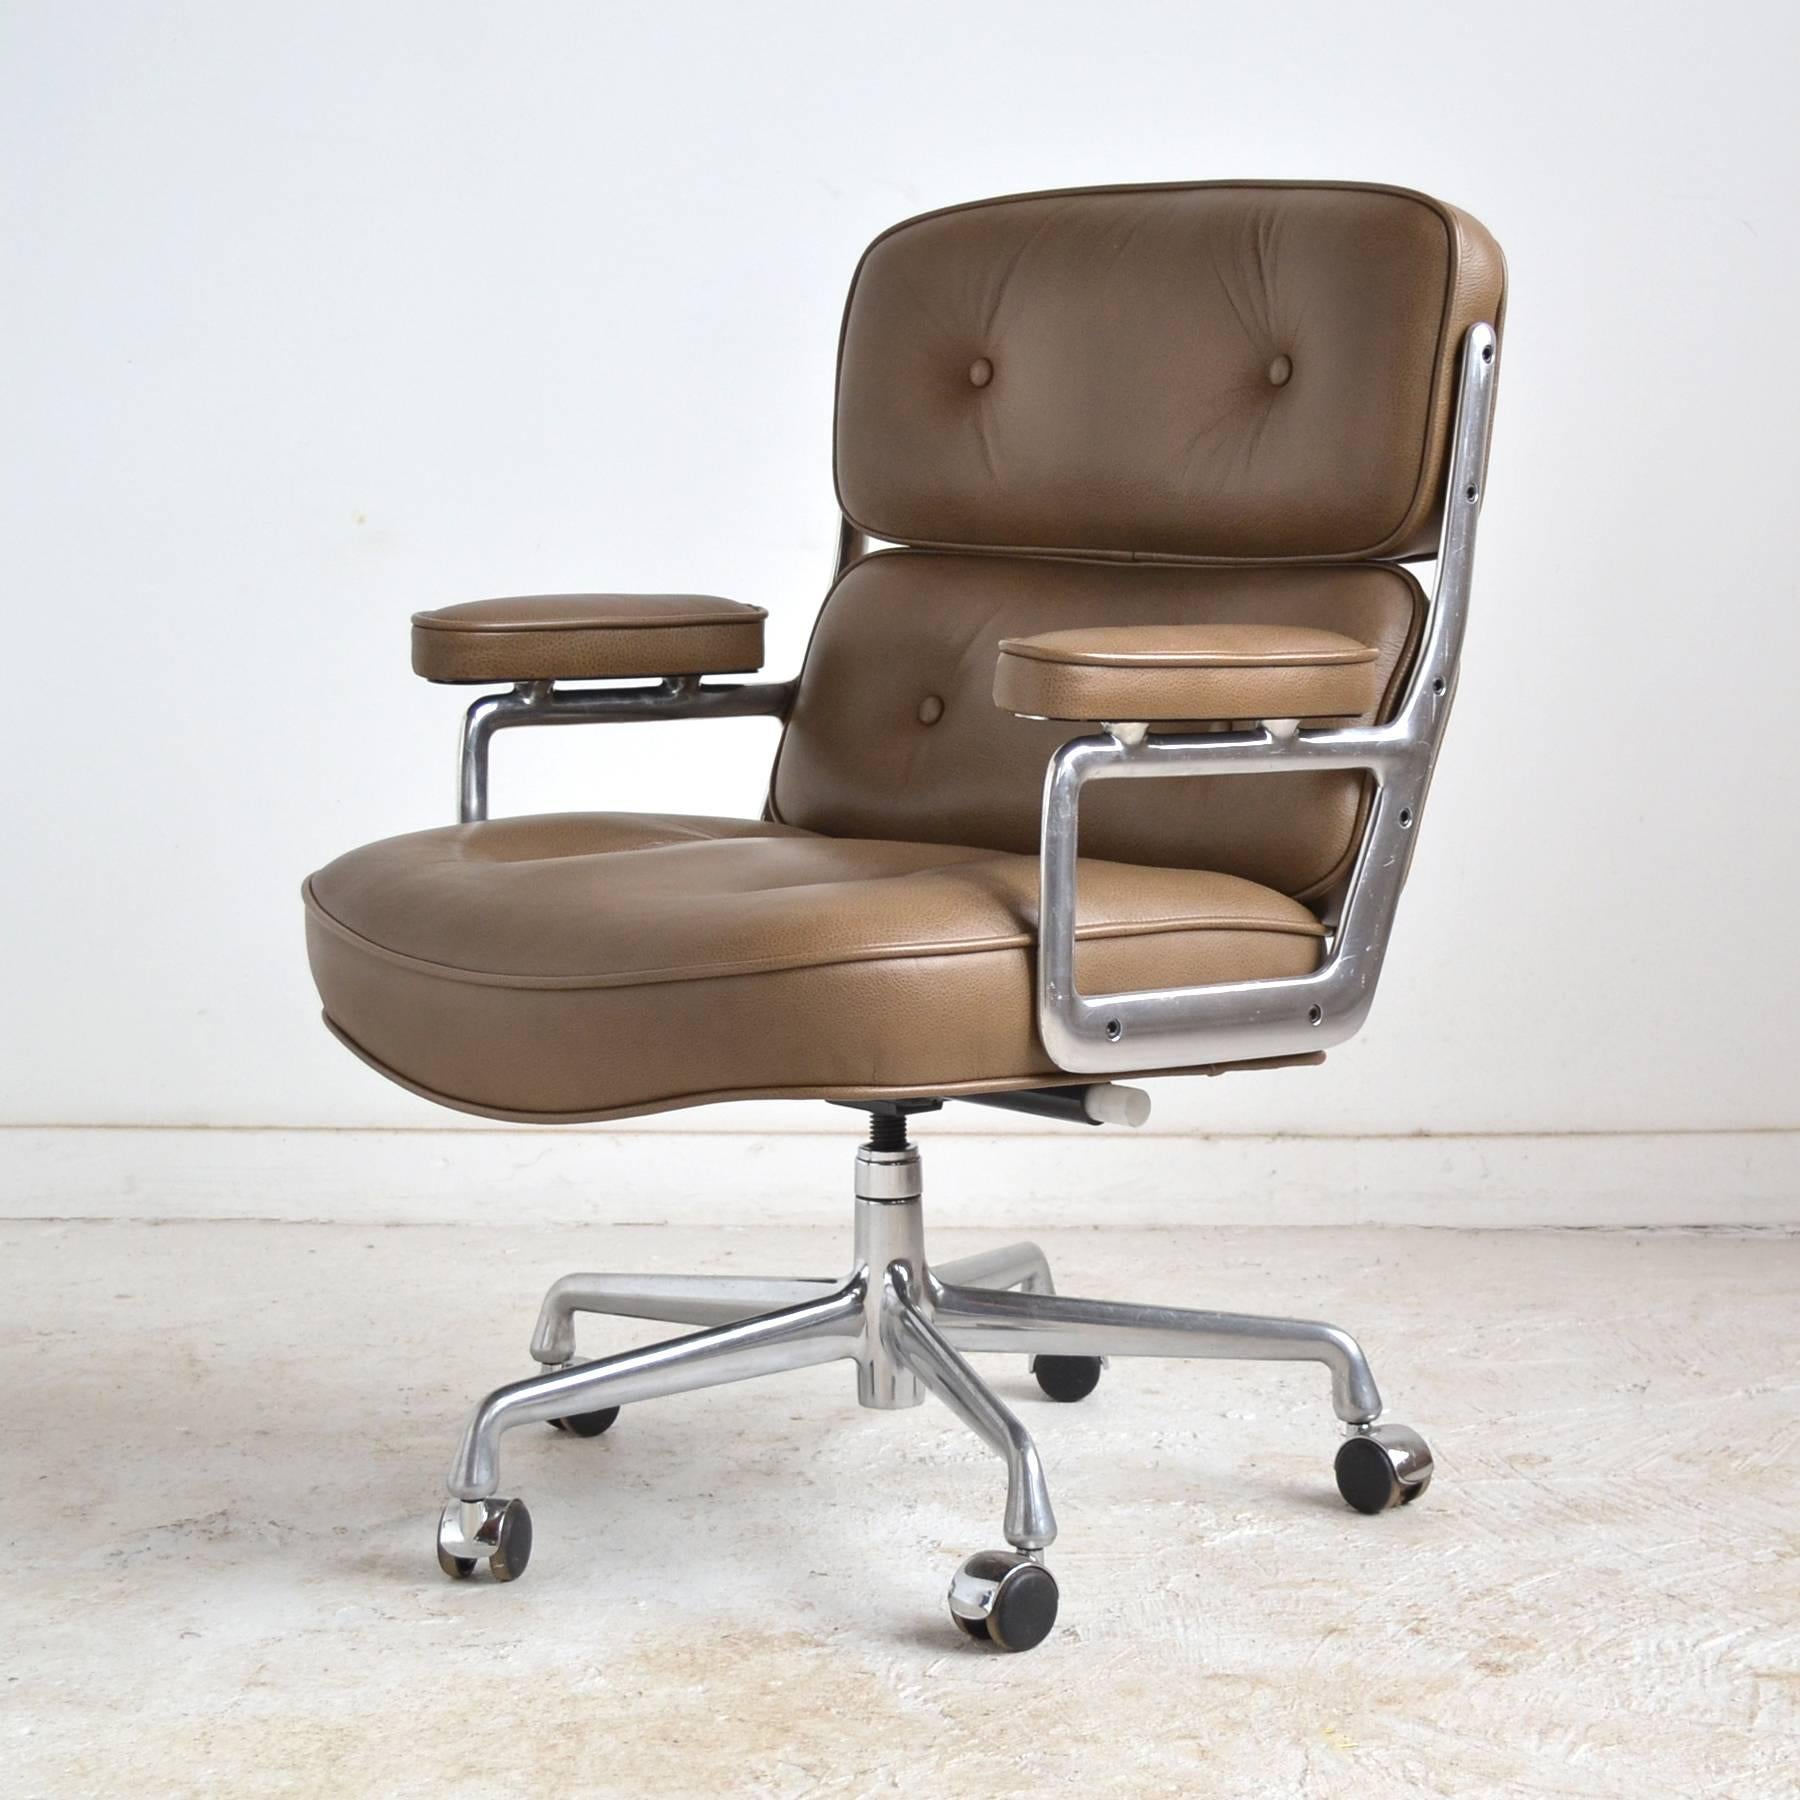 American Charles and Ray Eames Time-Life Chair by Herman Miller